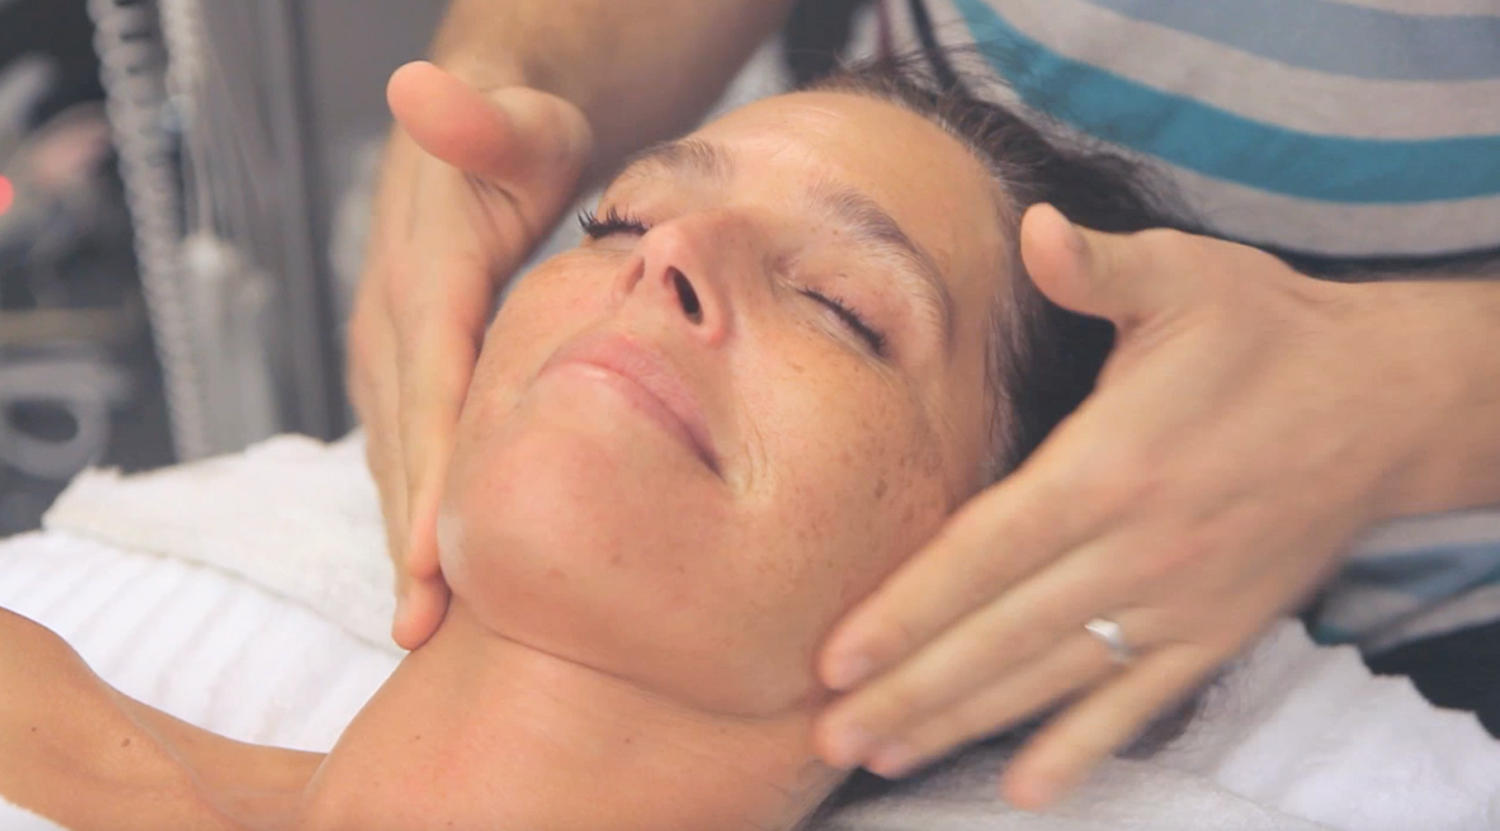 Woman lying on a facial bed. Esthetician's hands are seen performing facial massage at the woman's jawline. 